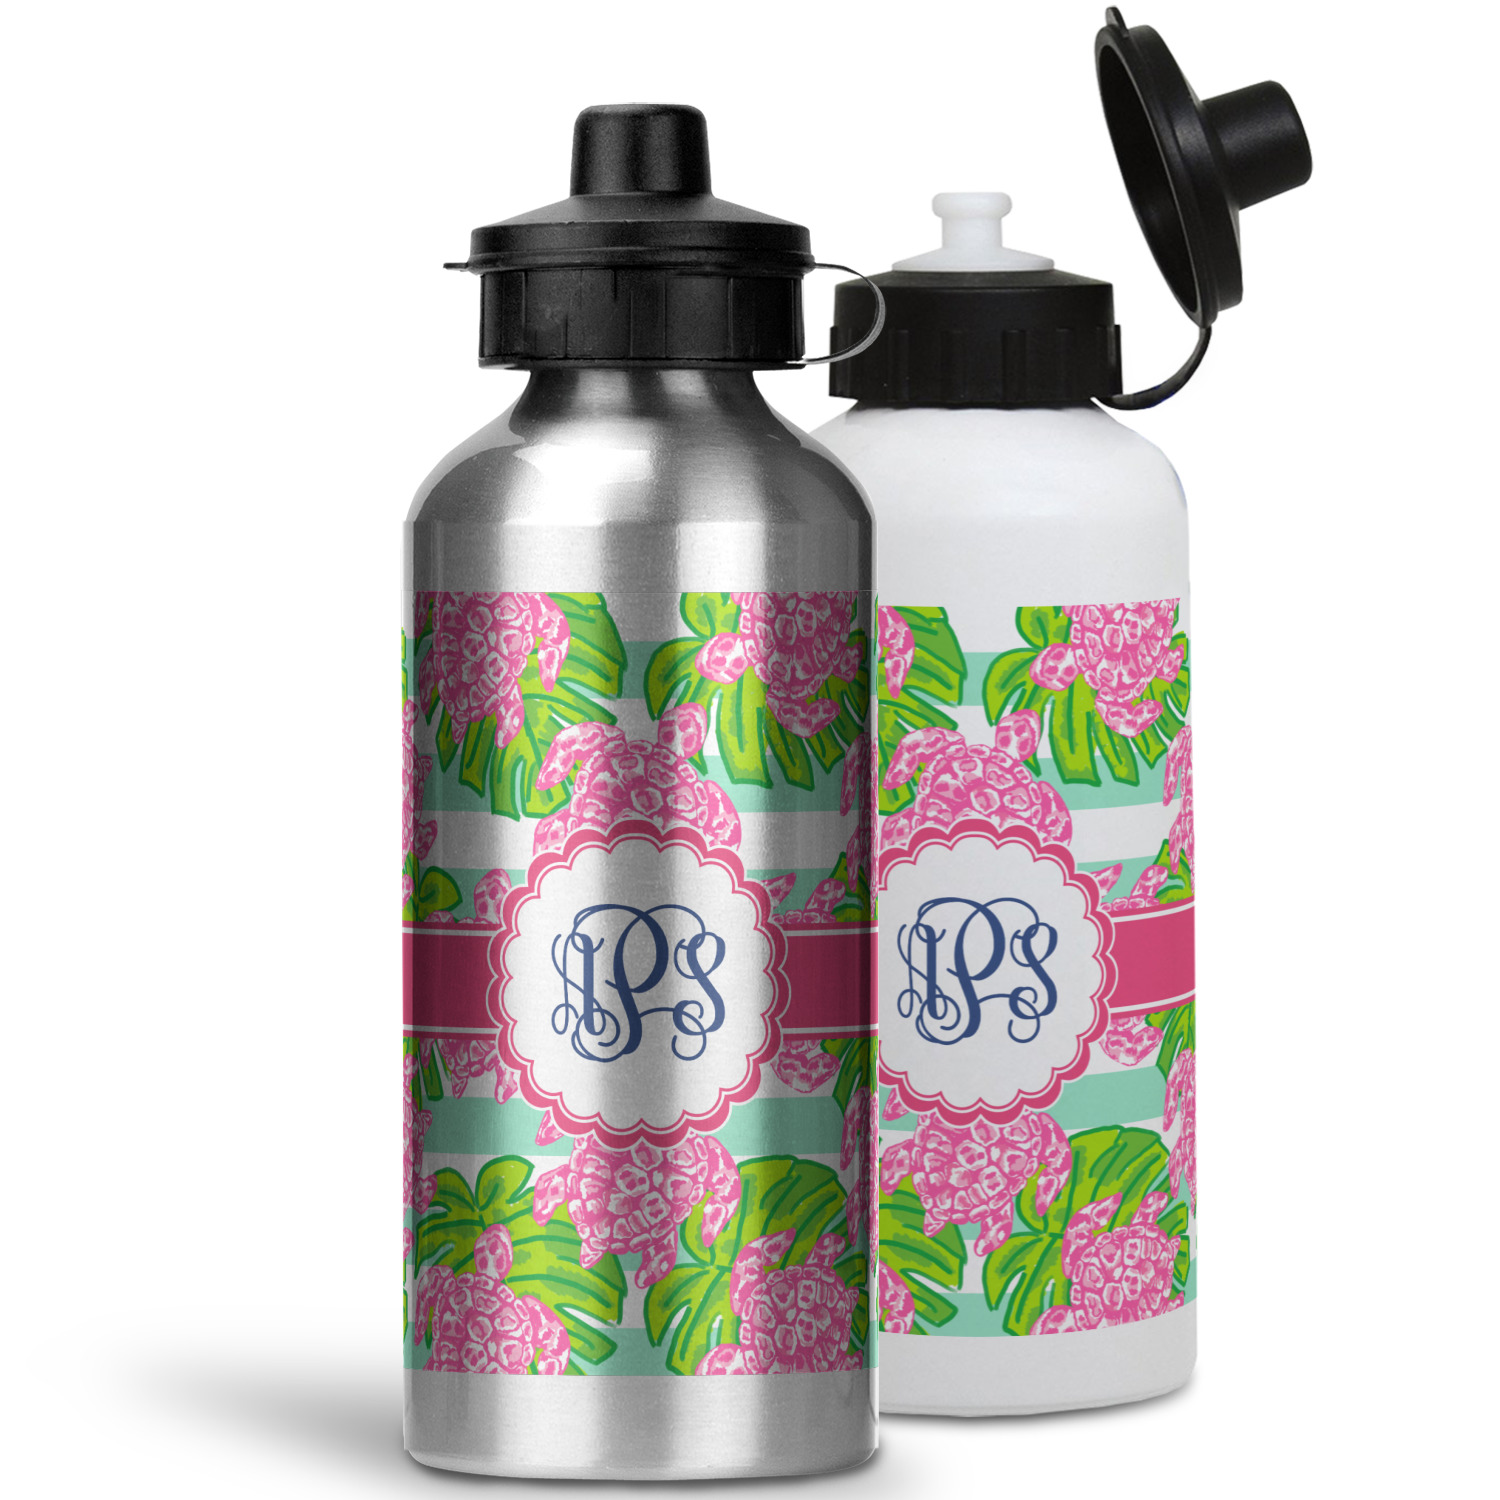  YouCustomizeIt Personalized Preppy Water Bottle - Aluminum - 20  oz : Sports & Outdoors